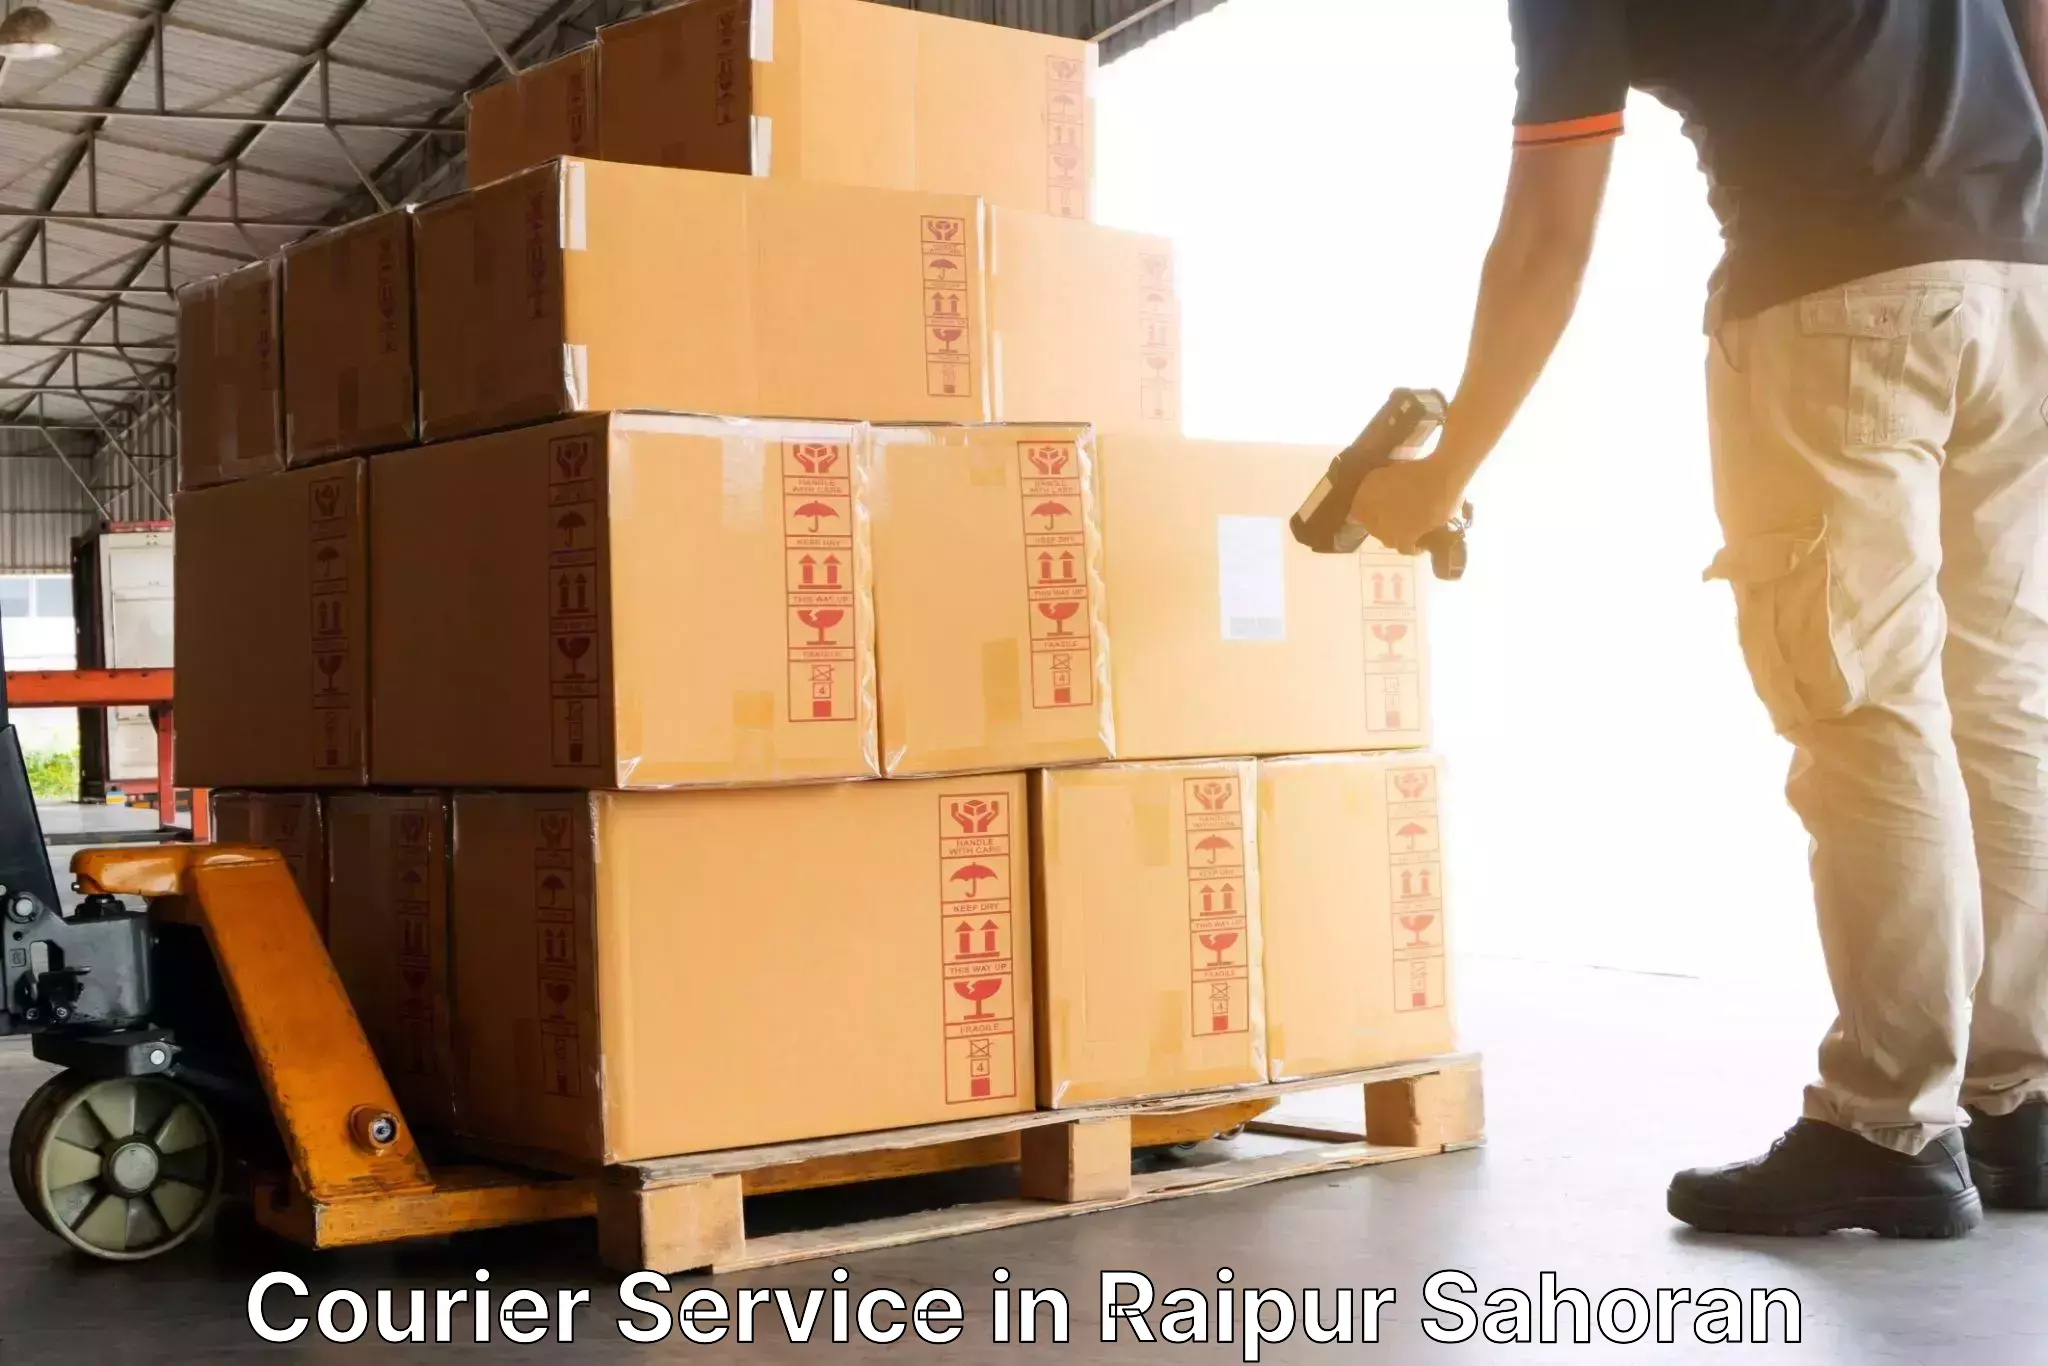 Small business couriers in Raipur Sahoran